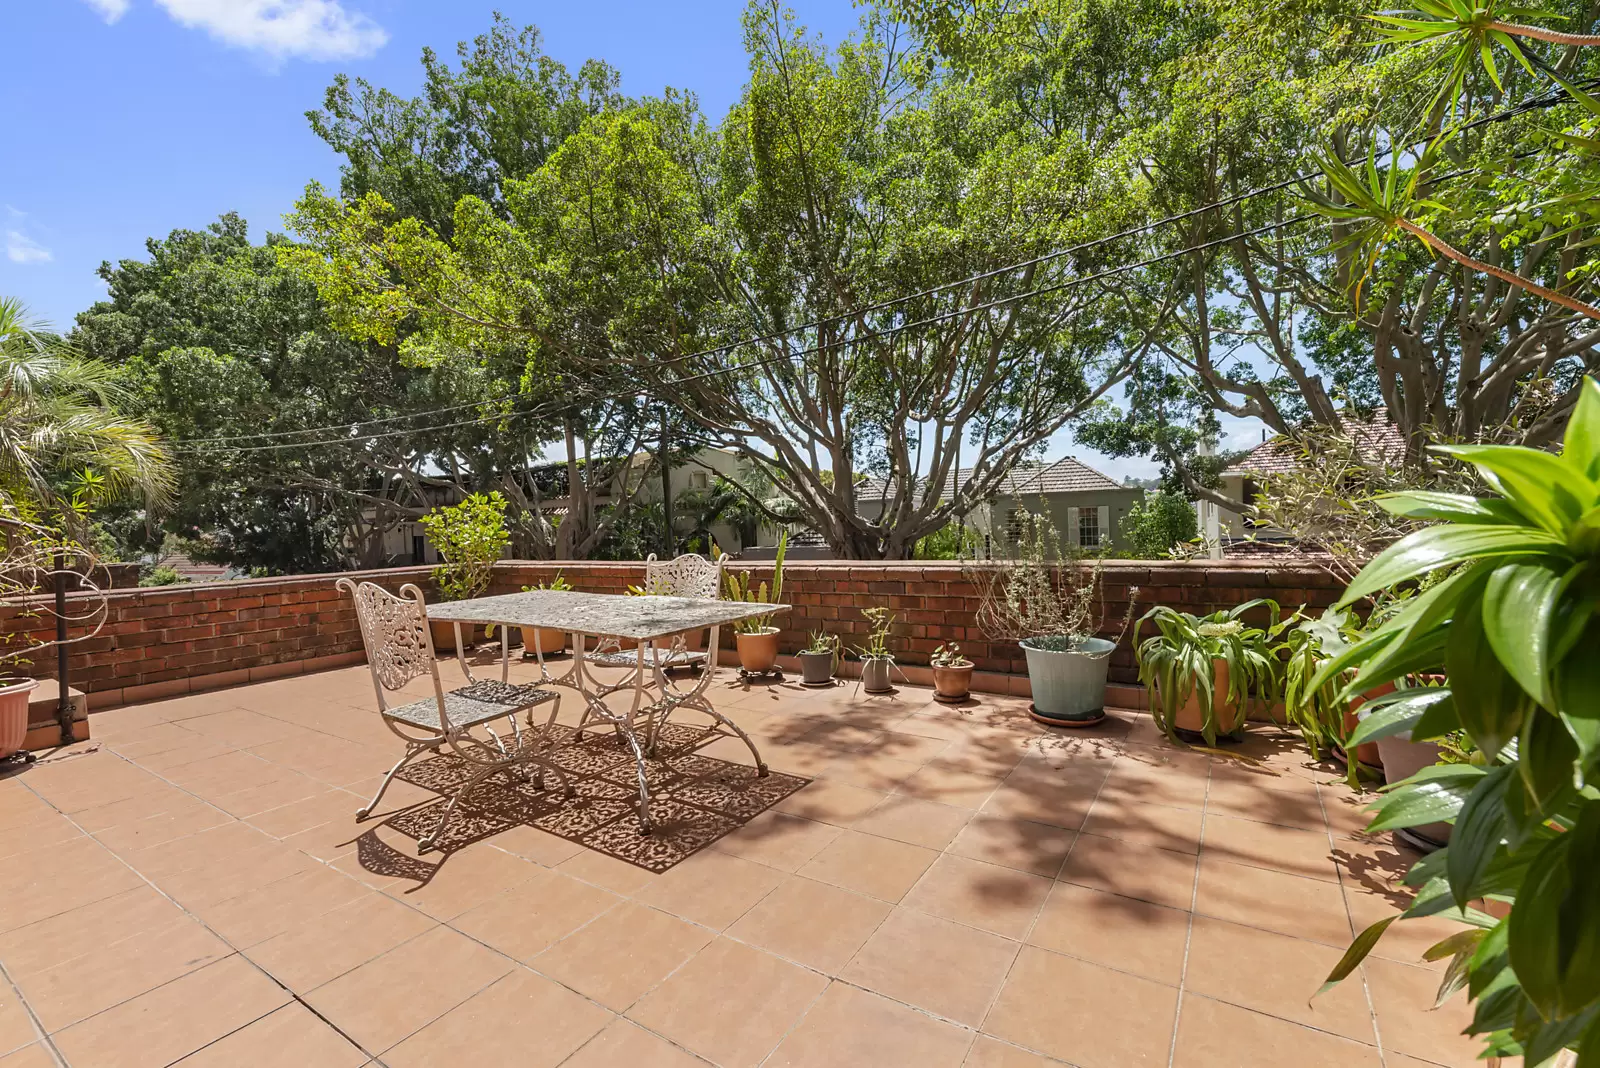 Photo #1: 1/410 Edgecliff Road, Woollahra - For Sale by Sydney Sotheby's International Realty